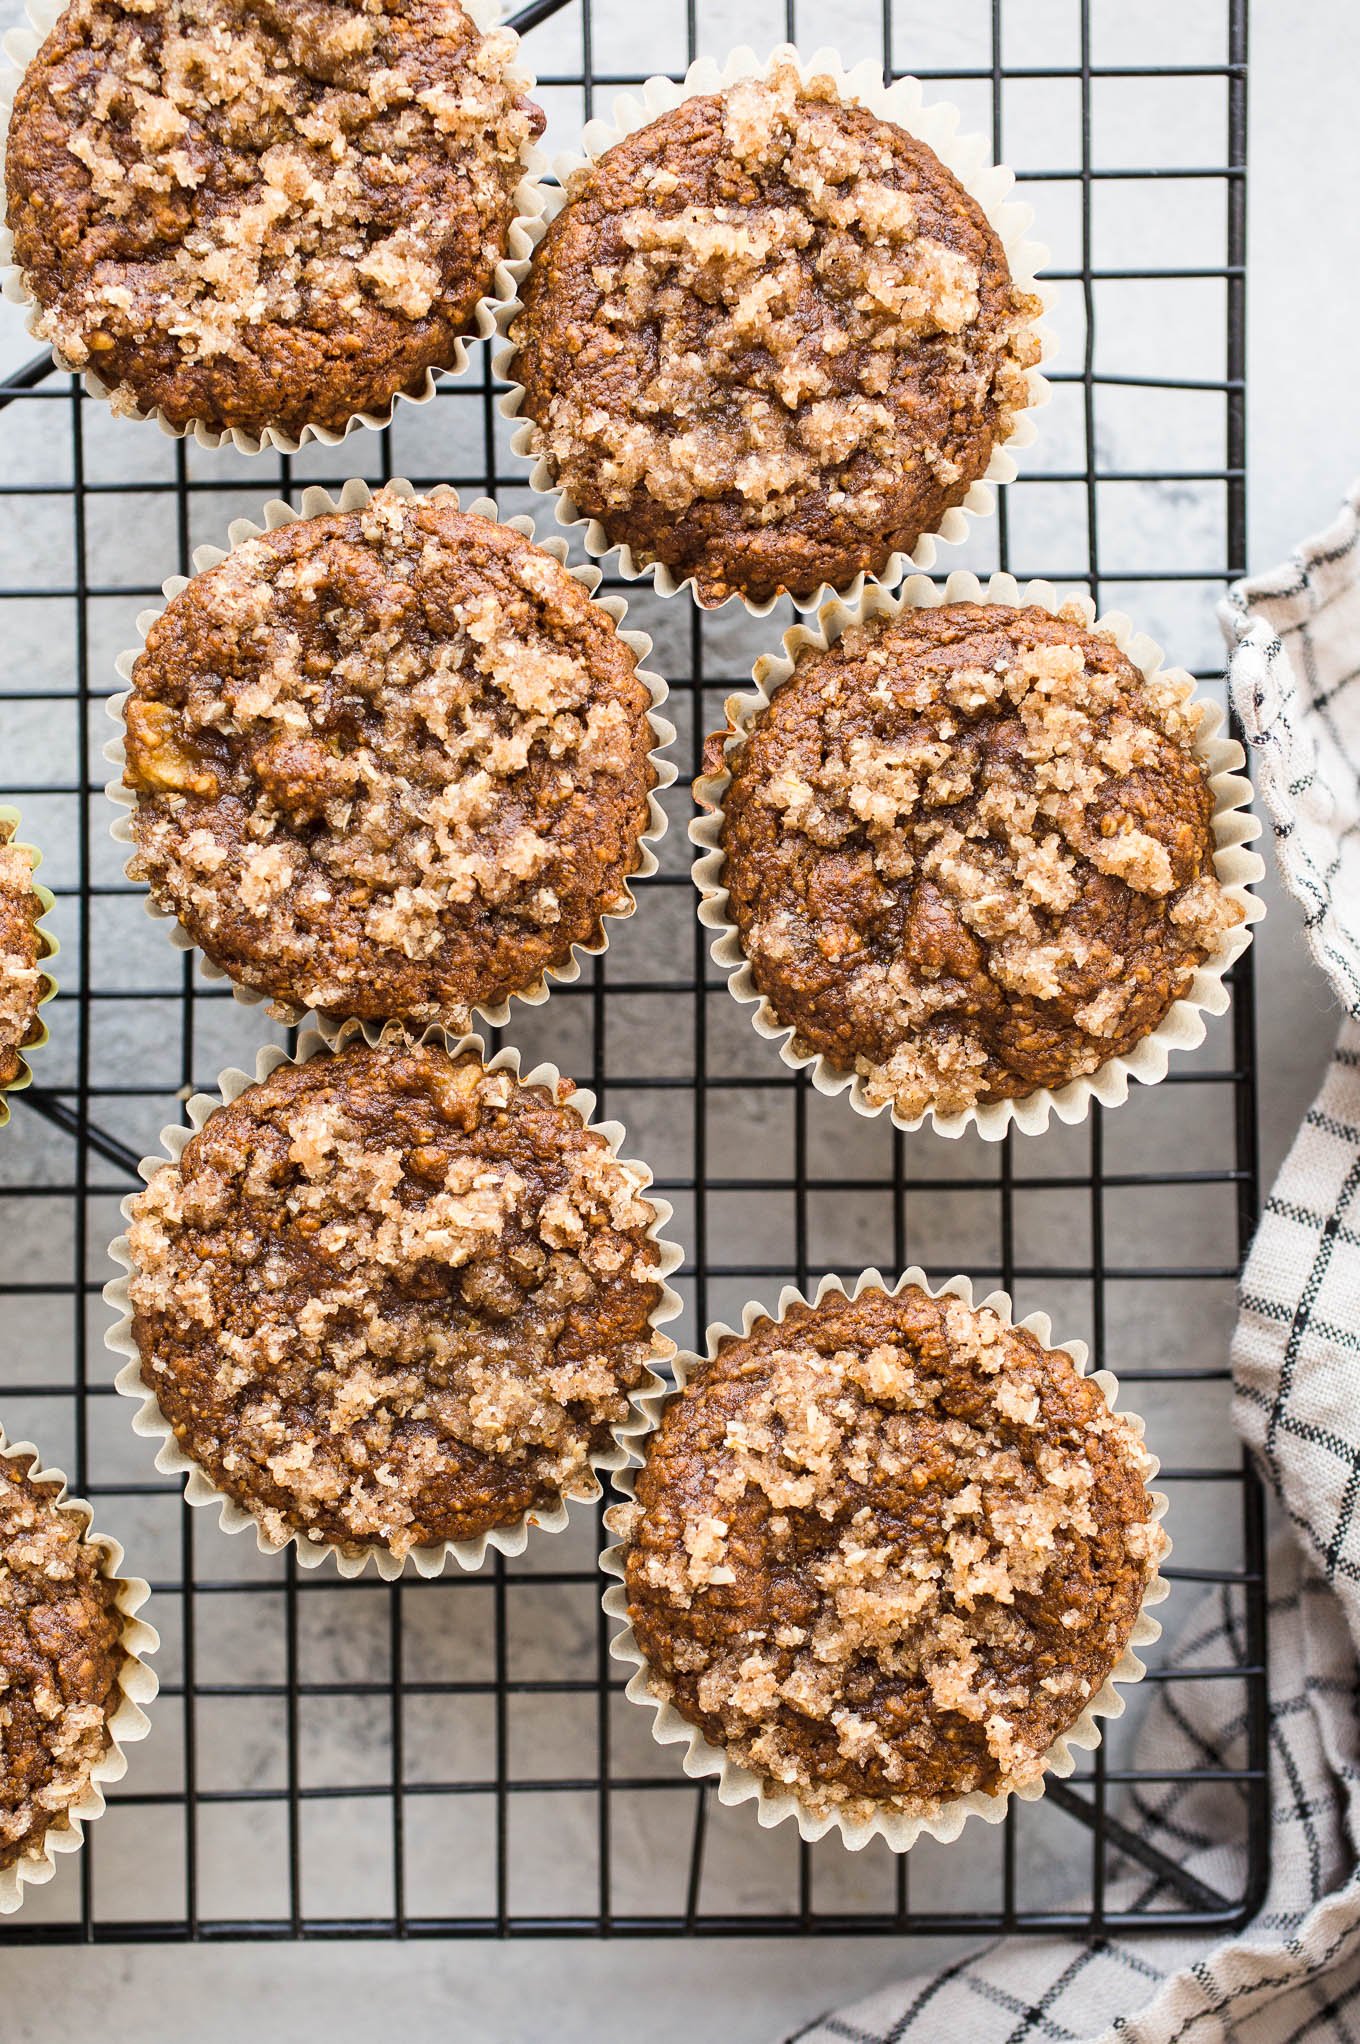 Gluten-Free Apple Crumb Muffins are made with whole grain gluten-free oat flour, almond flour, applesauce, and coconut sugar topped with a cinnamon sugar crumble. Dairy-free, vegan.